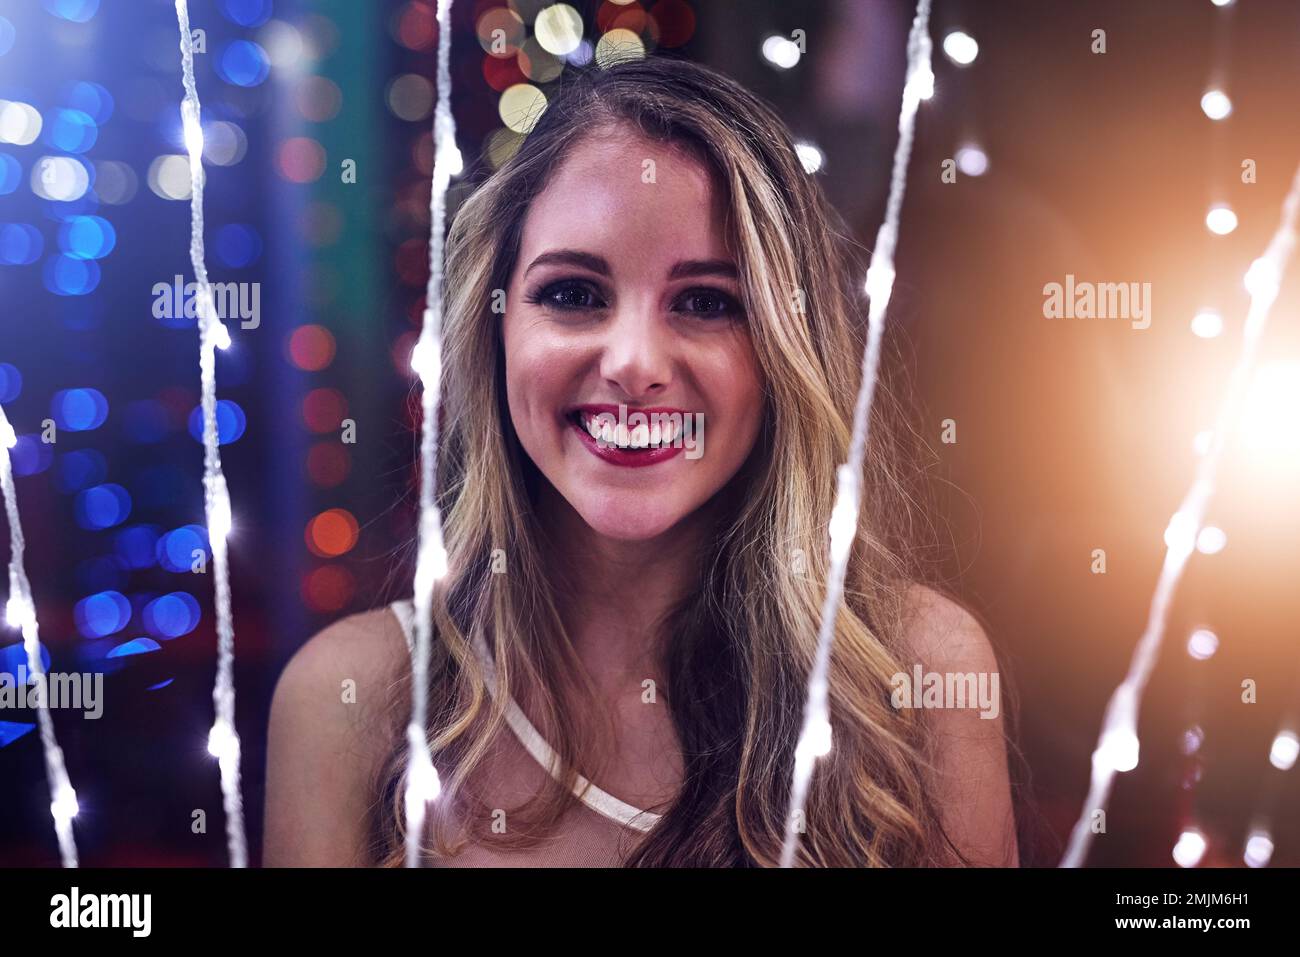 Feeling festive under the party lights. Portrait of a happy young woman playing with string lights in a night club. Stock Photo